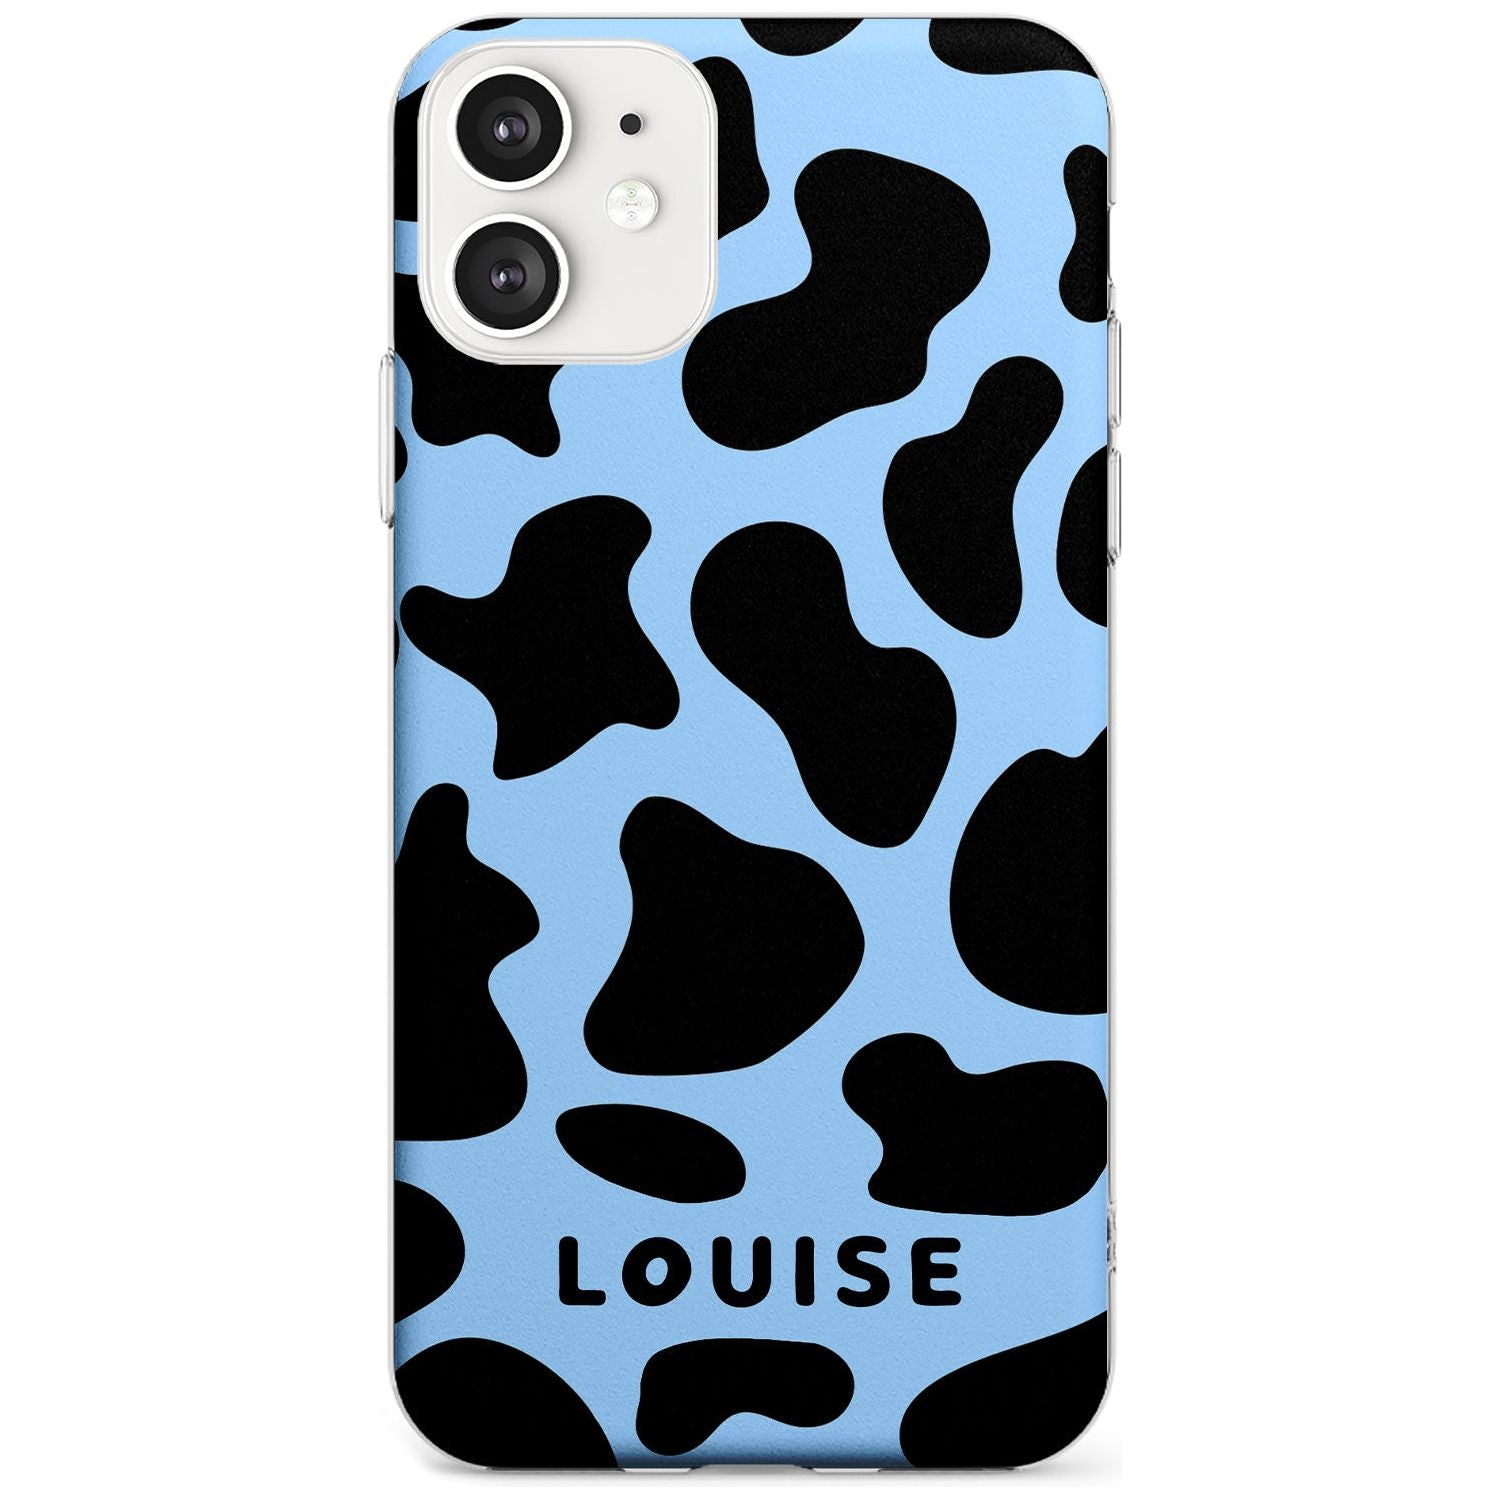 Personalised Blue and Black Cow Print Slim TPU Phone Case for iPhone 11